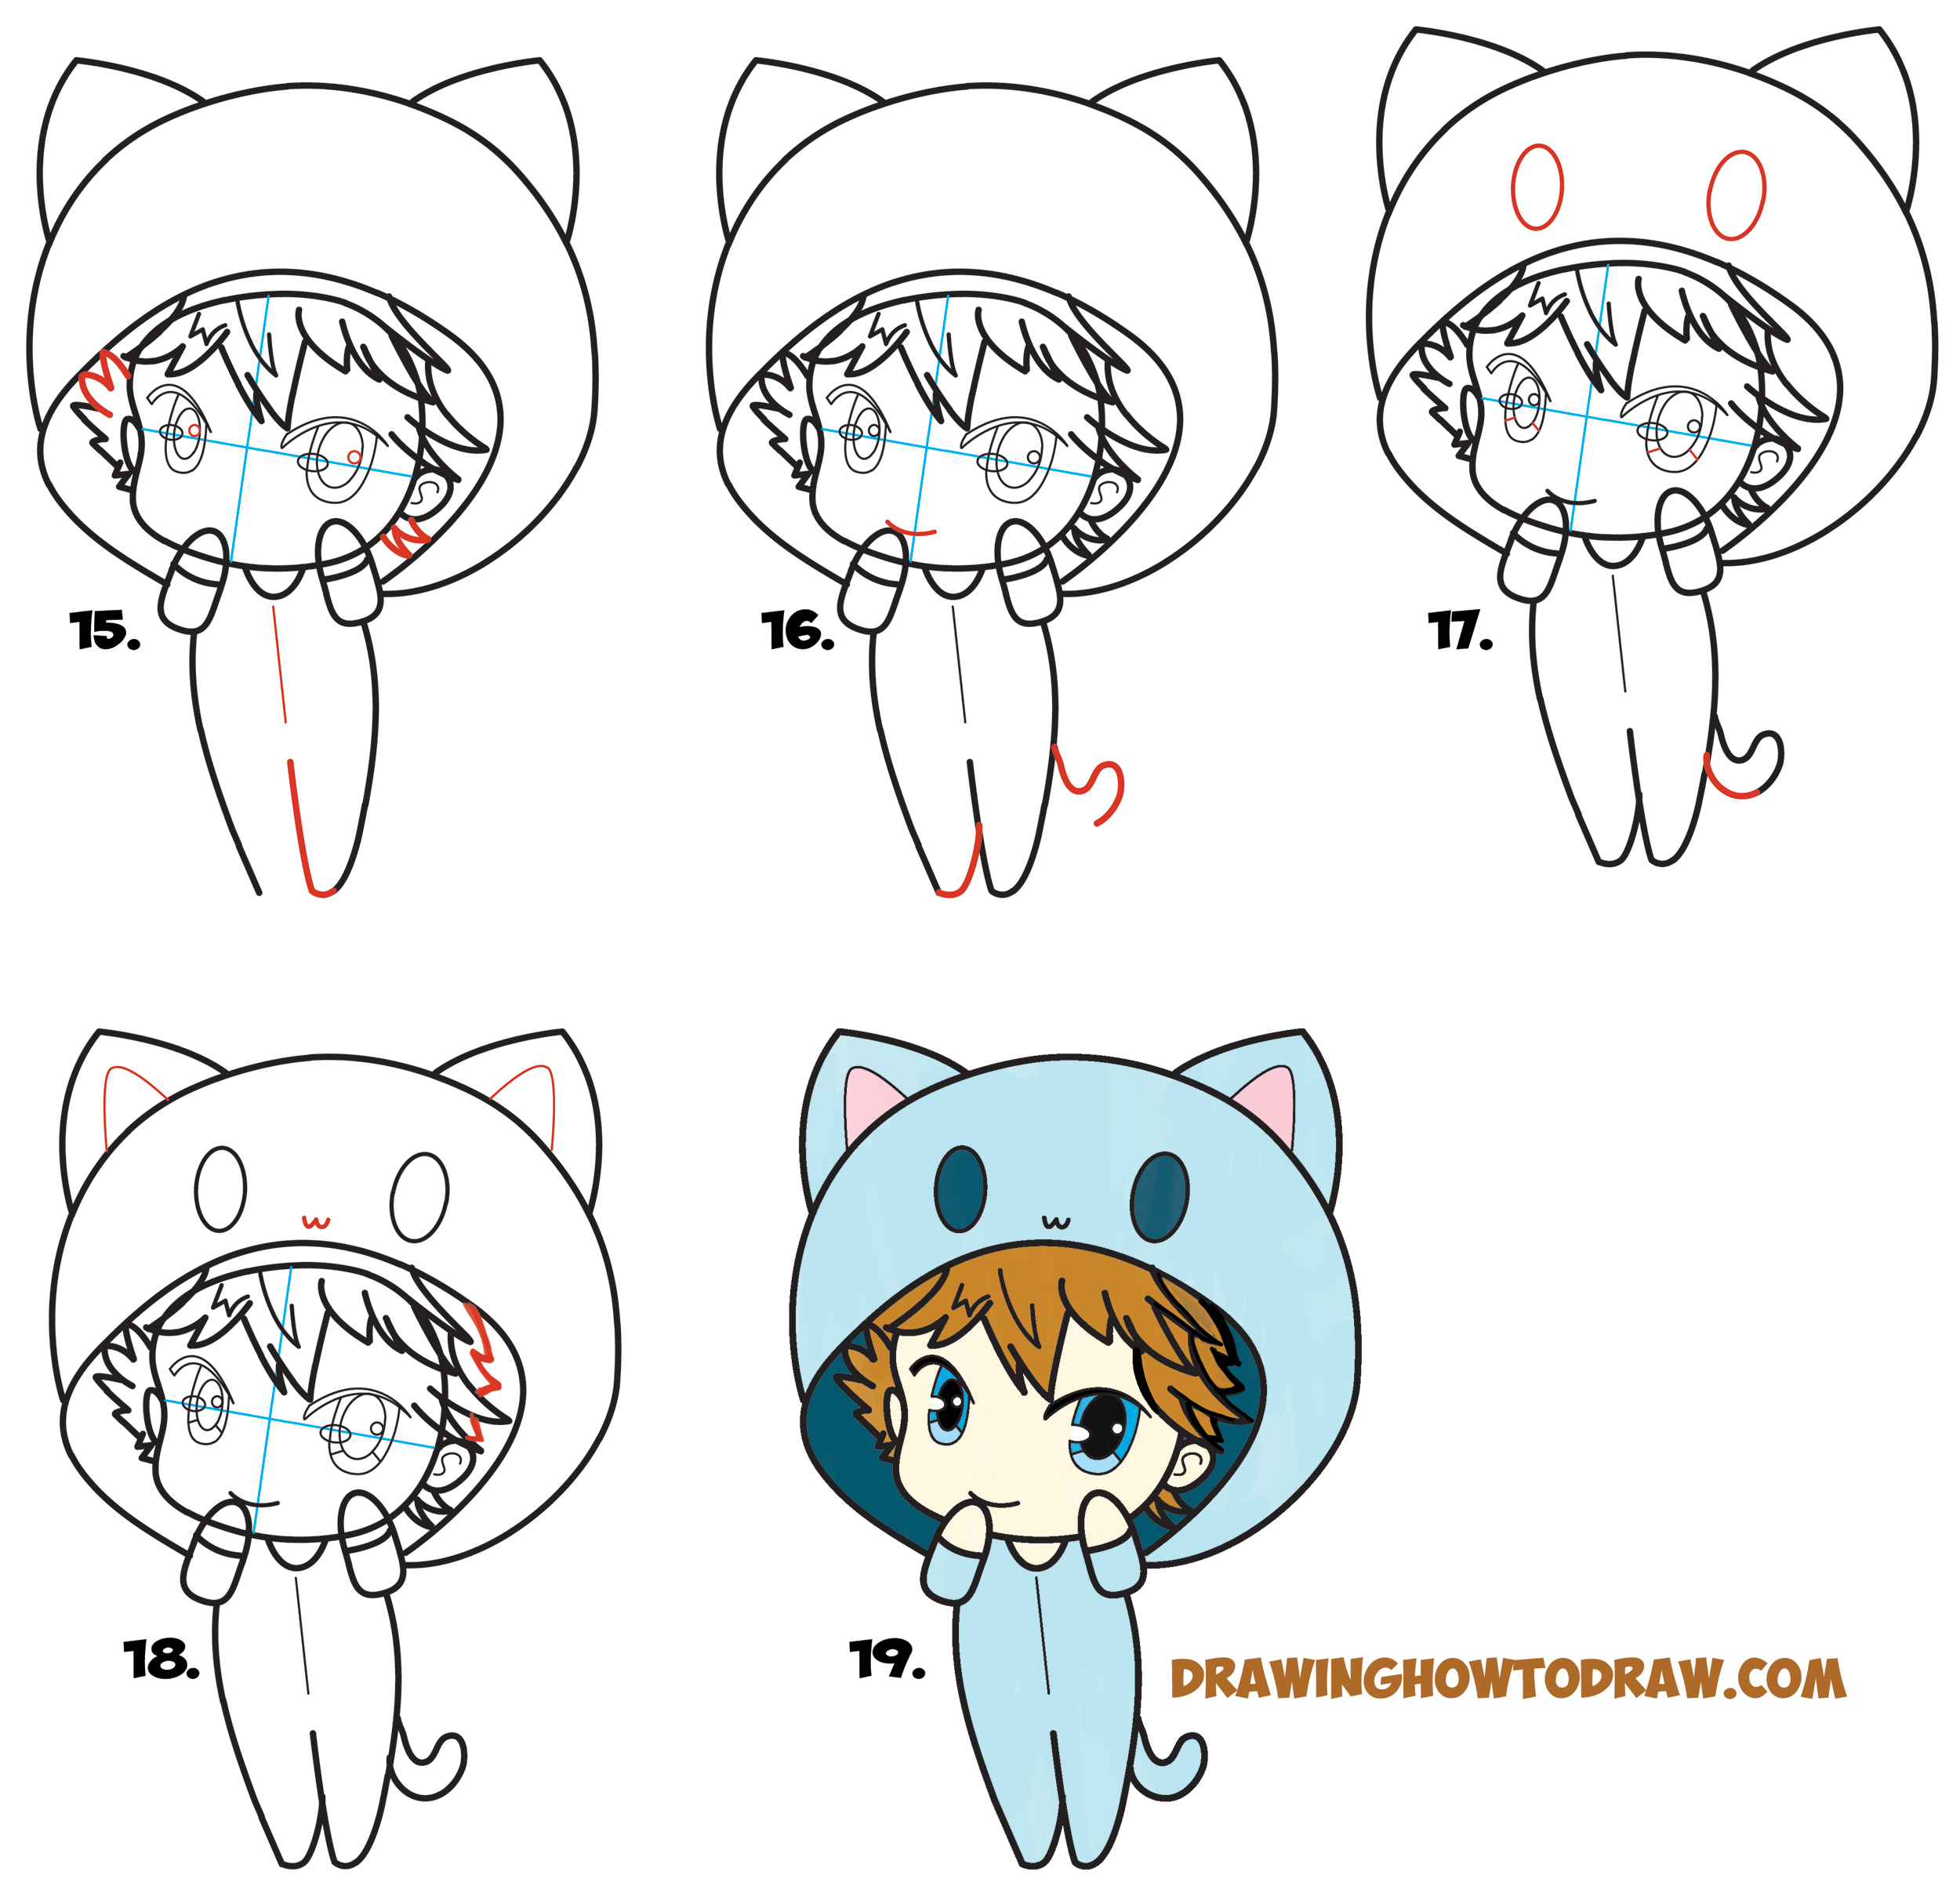 How to Draw a Chibi Boy with Hood On Drawing Cute Chibi Boys Easy